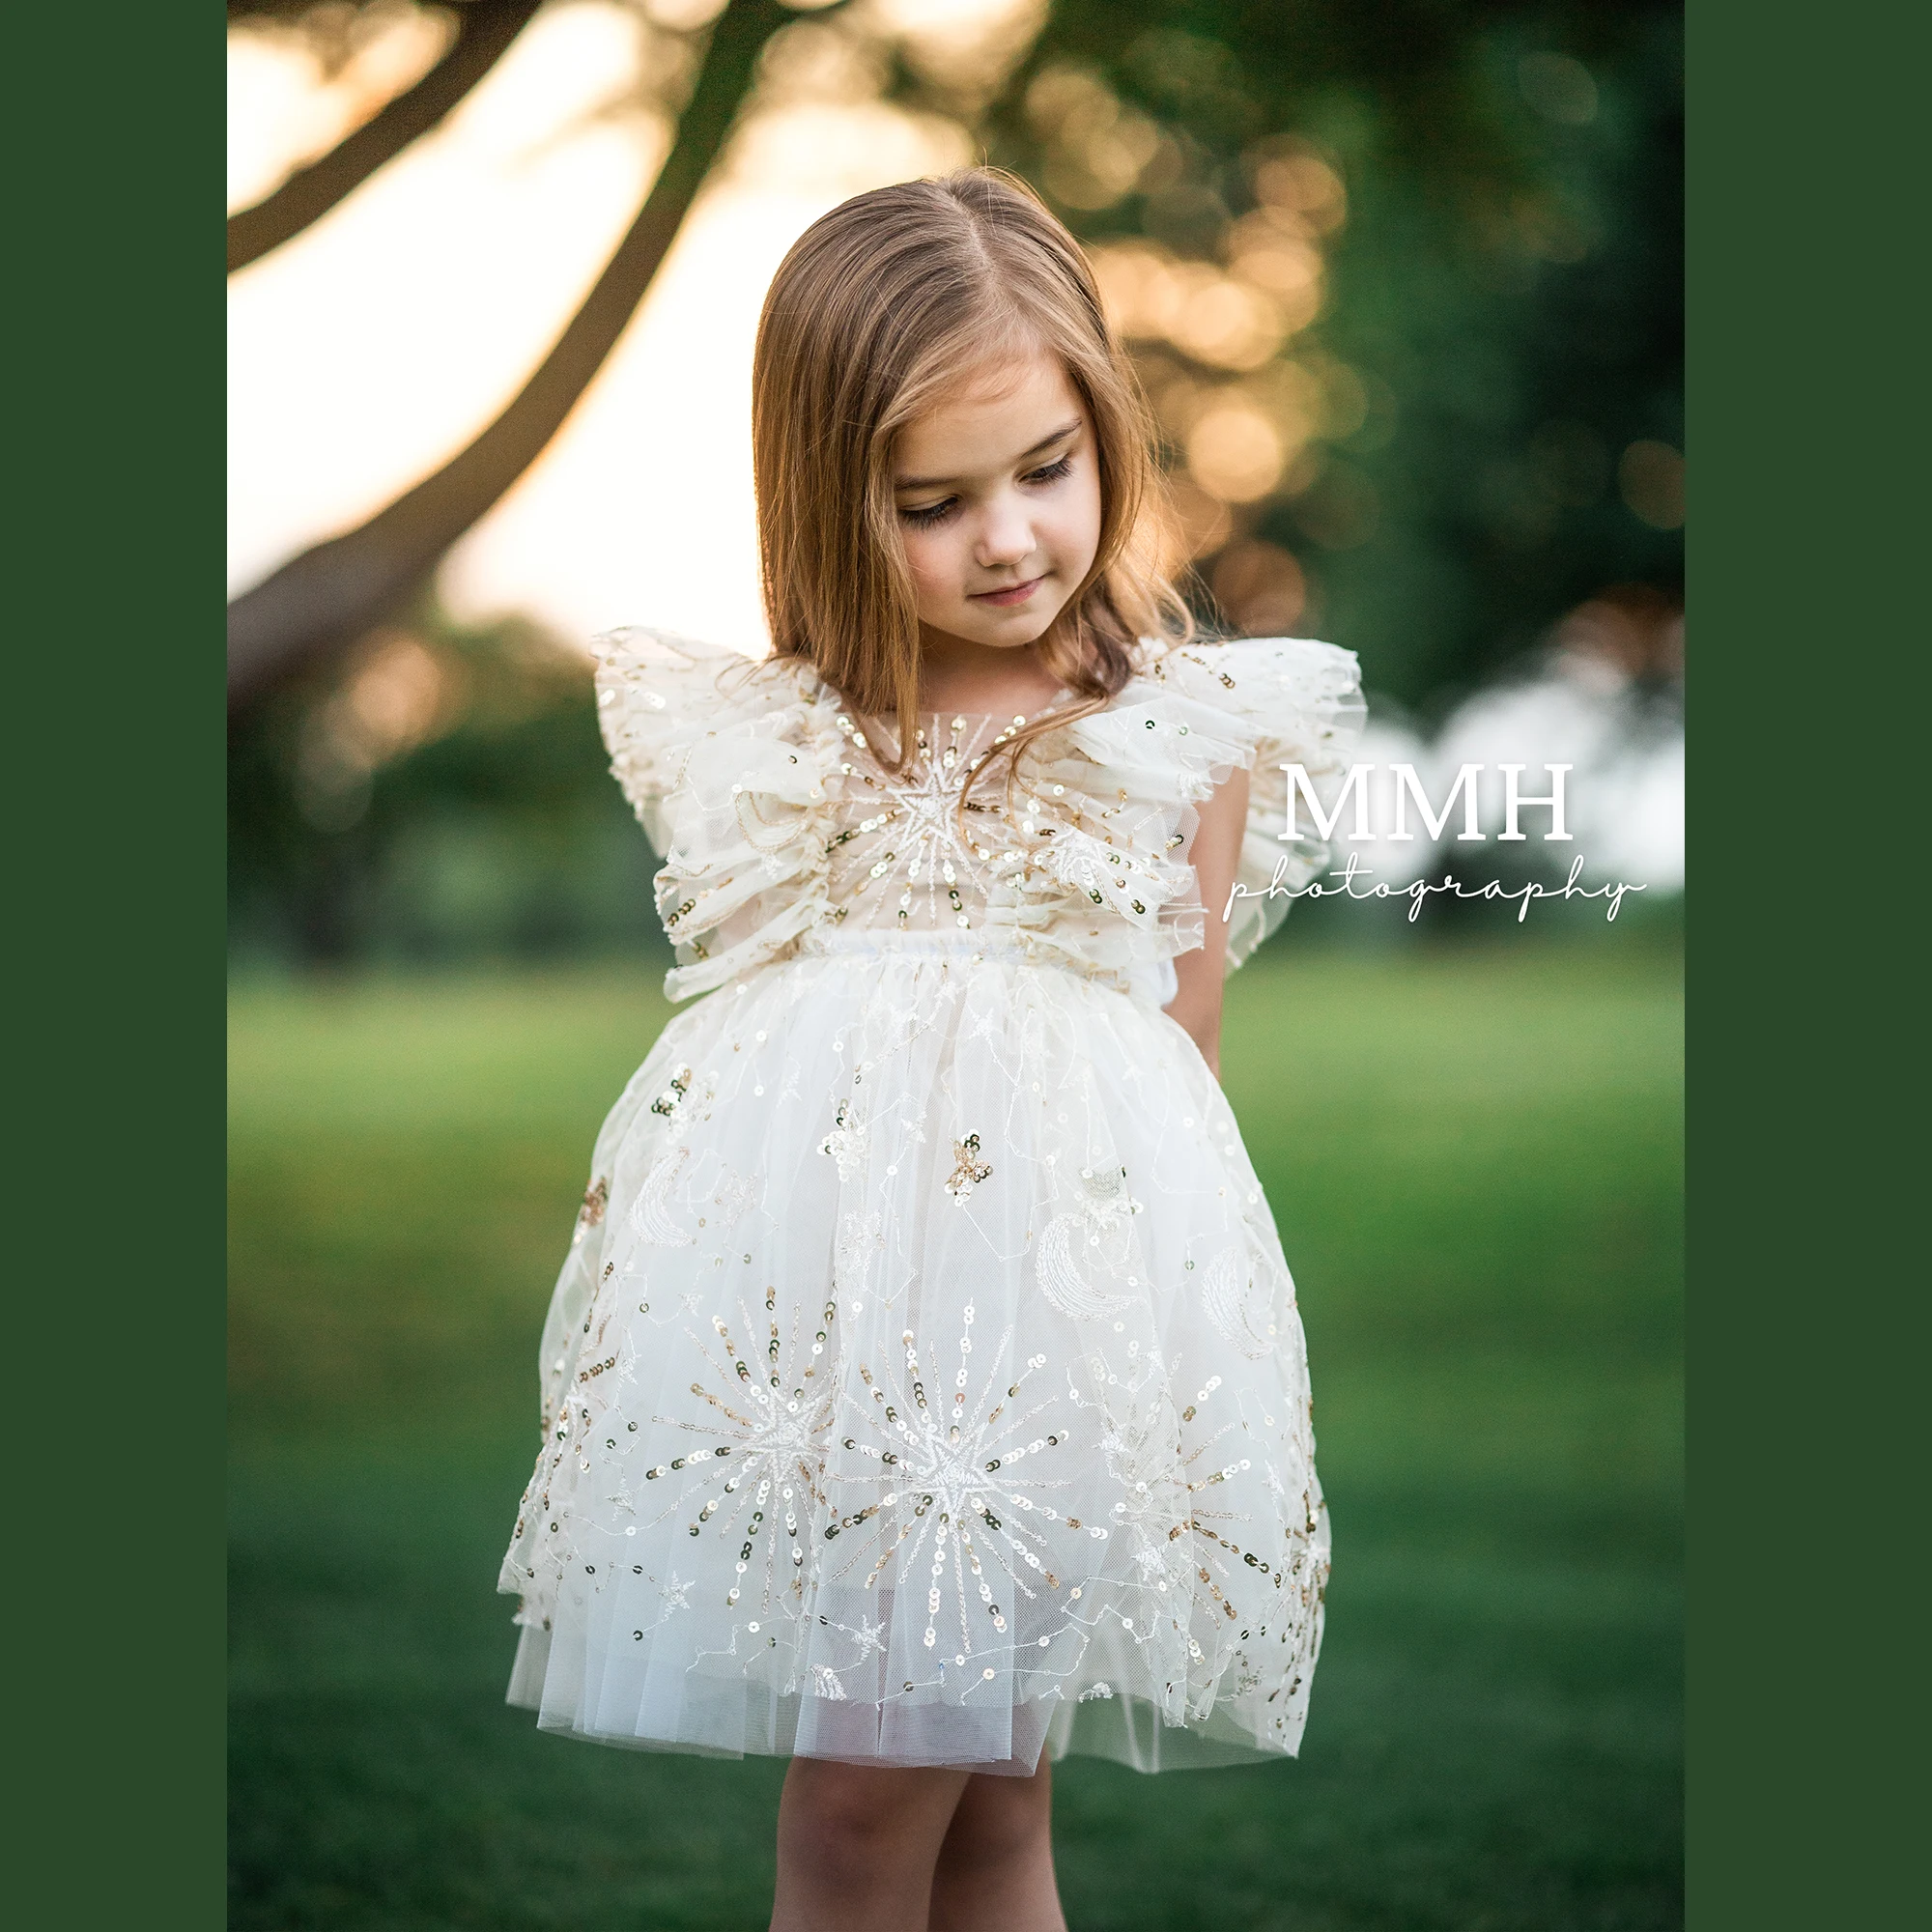 

Don&Judy Ruffle Princess Dress Photo Shoot Sequin Wrinkle Tulle Baby Girl Floral Costume Kid Clothing Photography Accessories